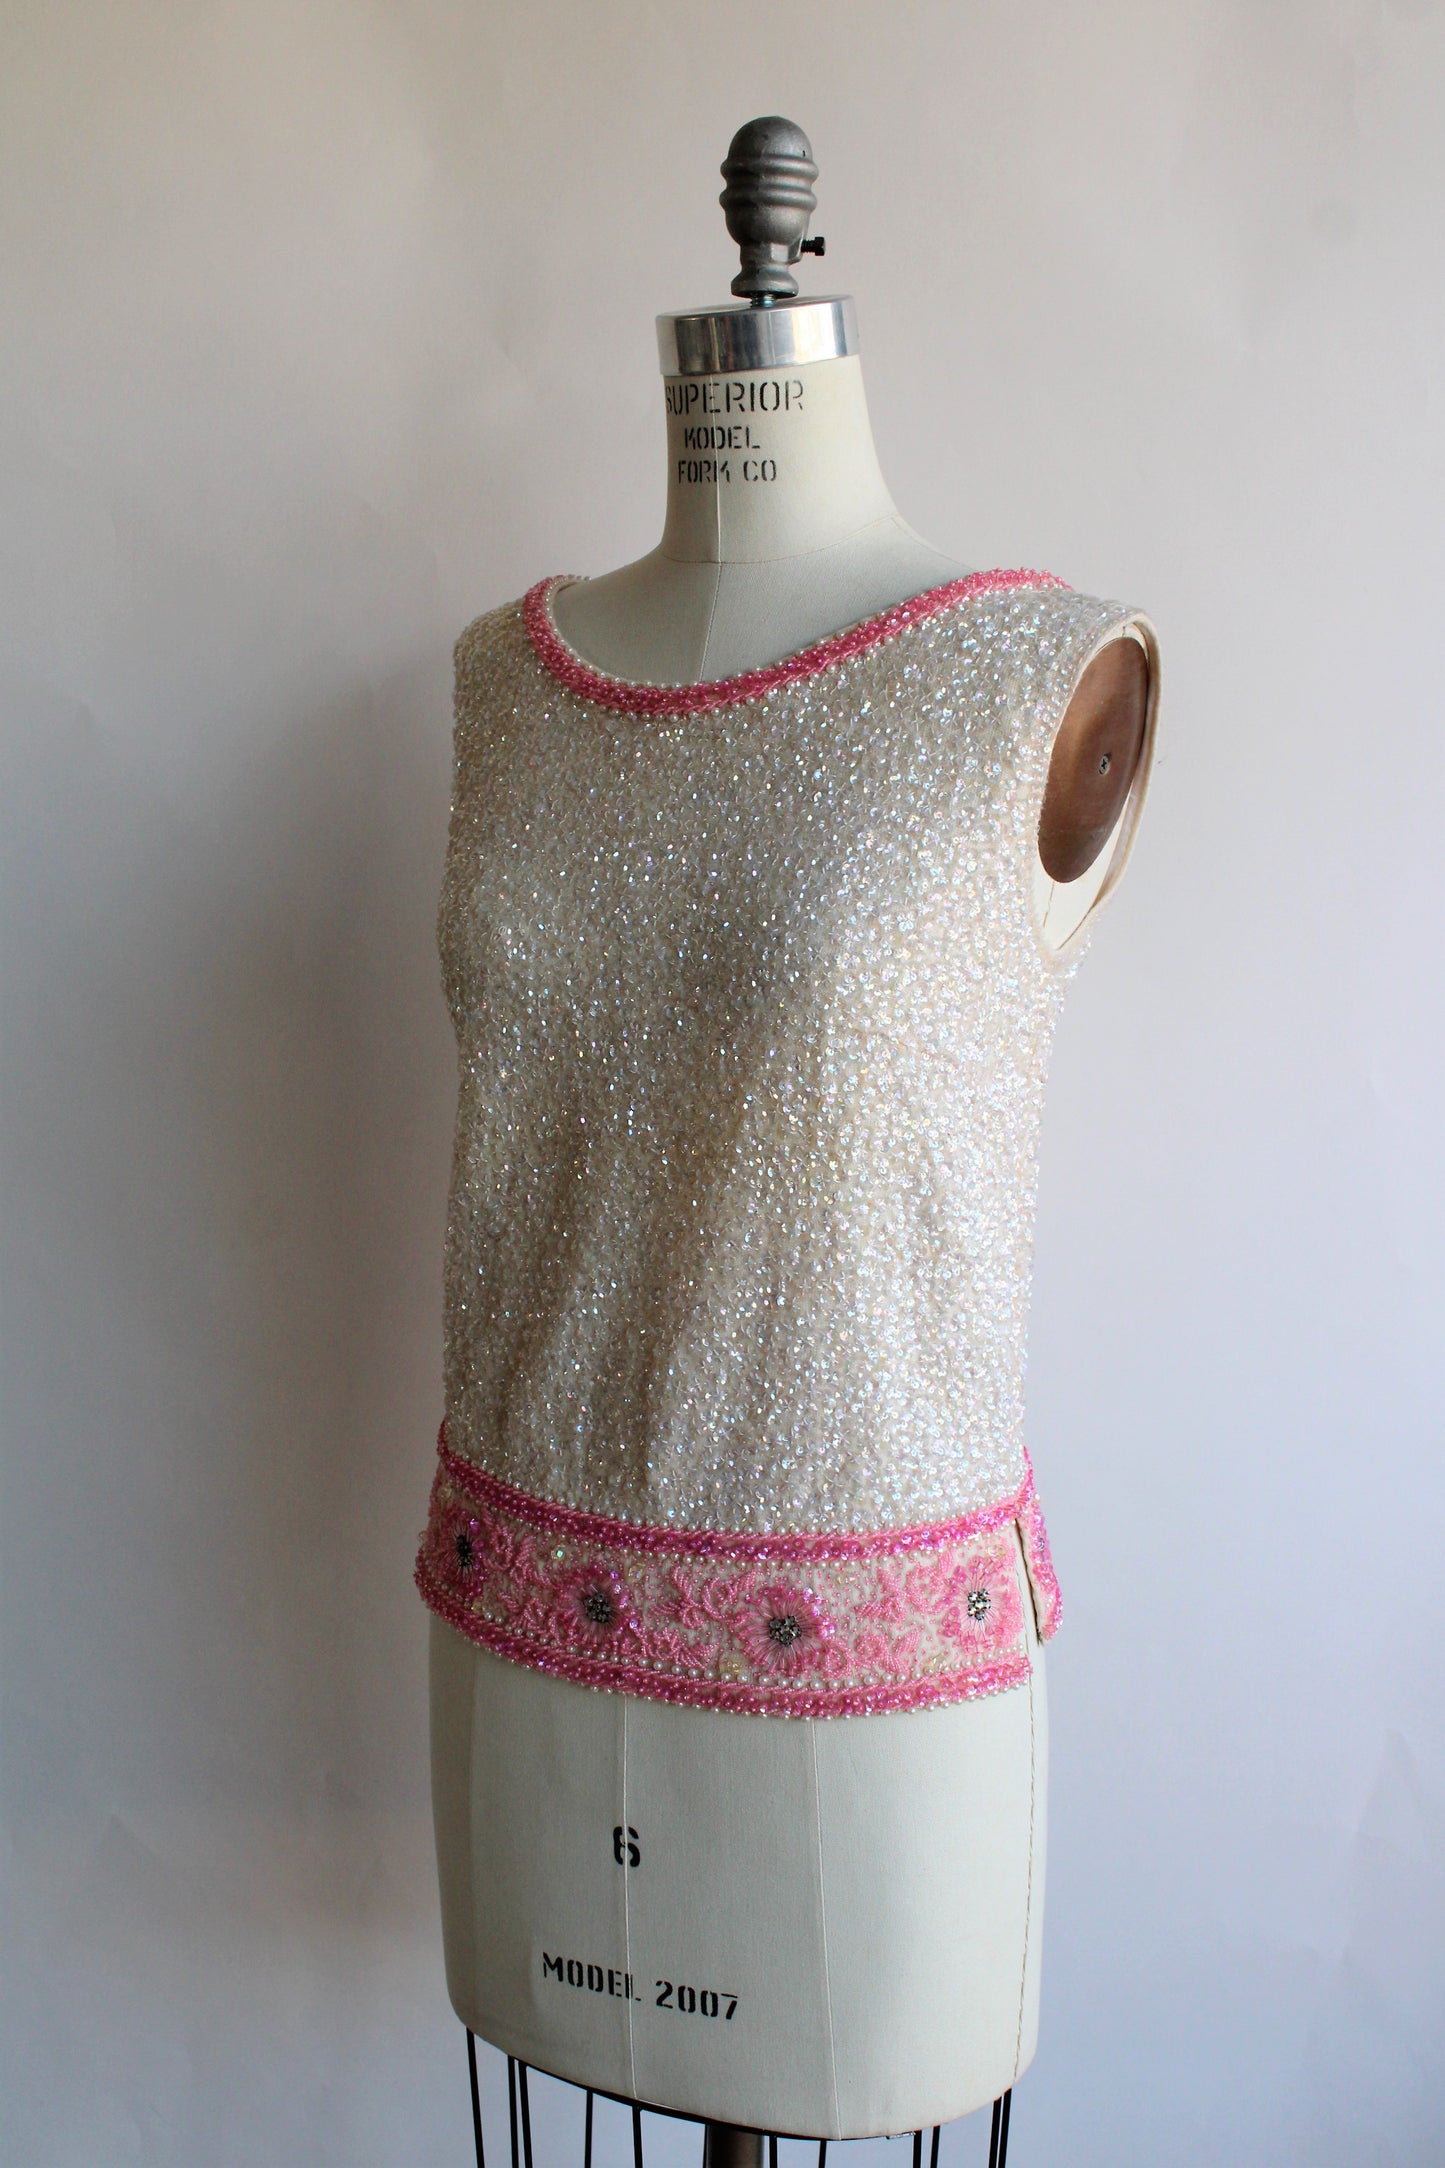 Vintage 1960s Pink and White Beaded Sweater Top